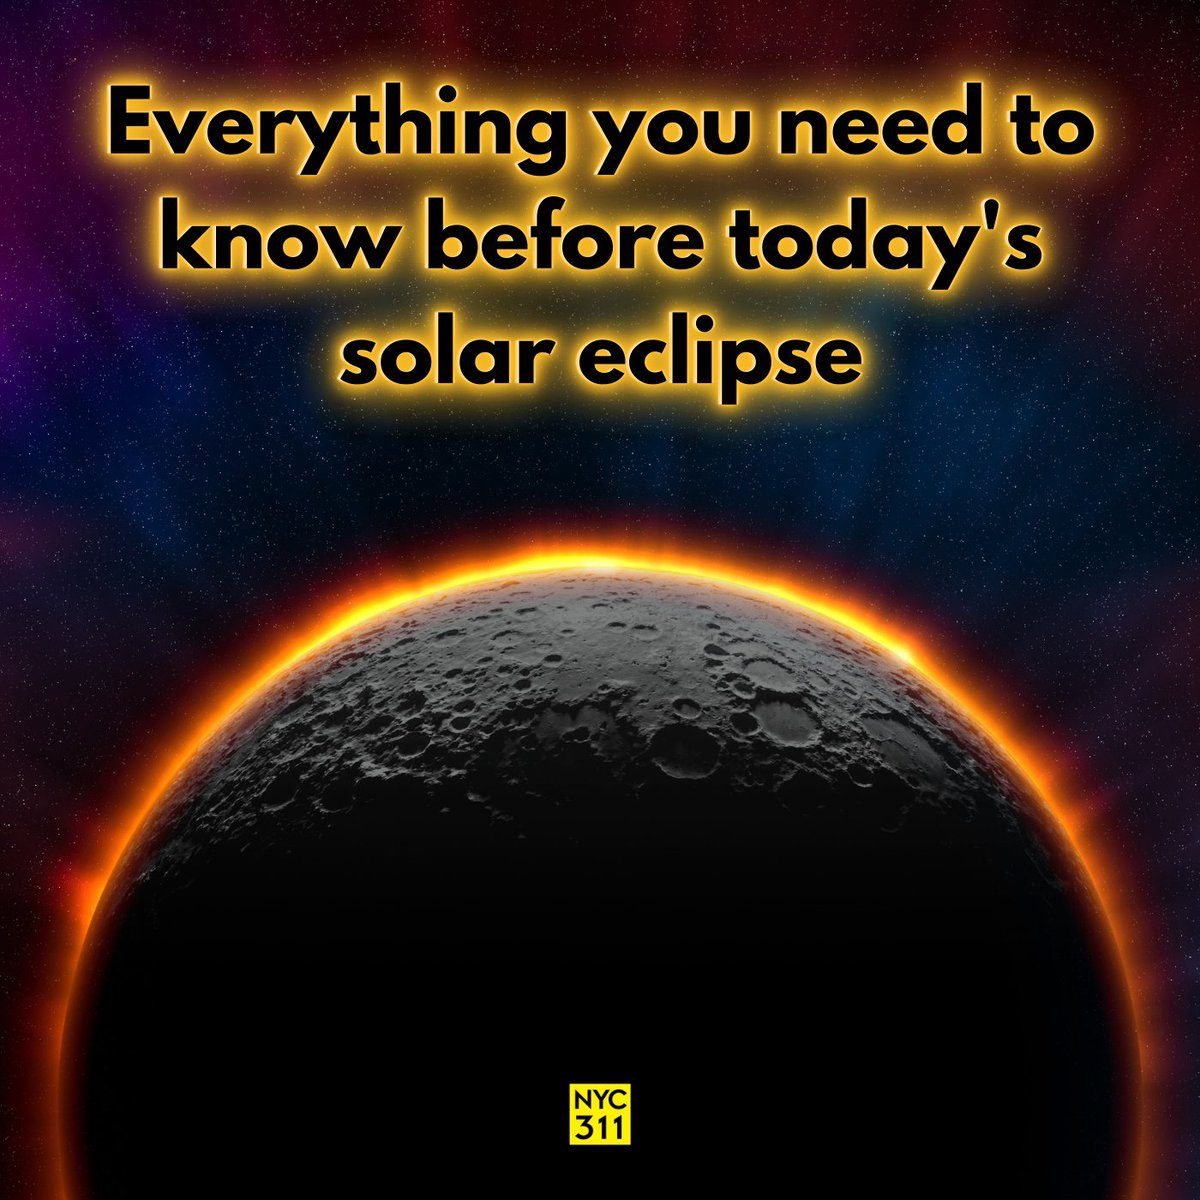 Today's solar eclipse begins at 2:10 PM and ends at 4:36 PM. If you are viewing the eclipse, protect your eyes by using ISO-certified solar viewing glasses (eclipse glasses) or a safe handheld solar viewer at all times. Don't look directly at the sun. on.nyc.gov/3xtK4Q4